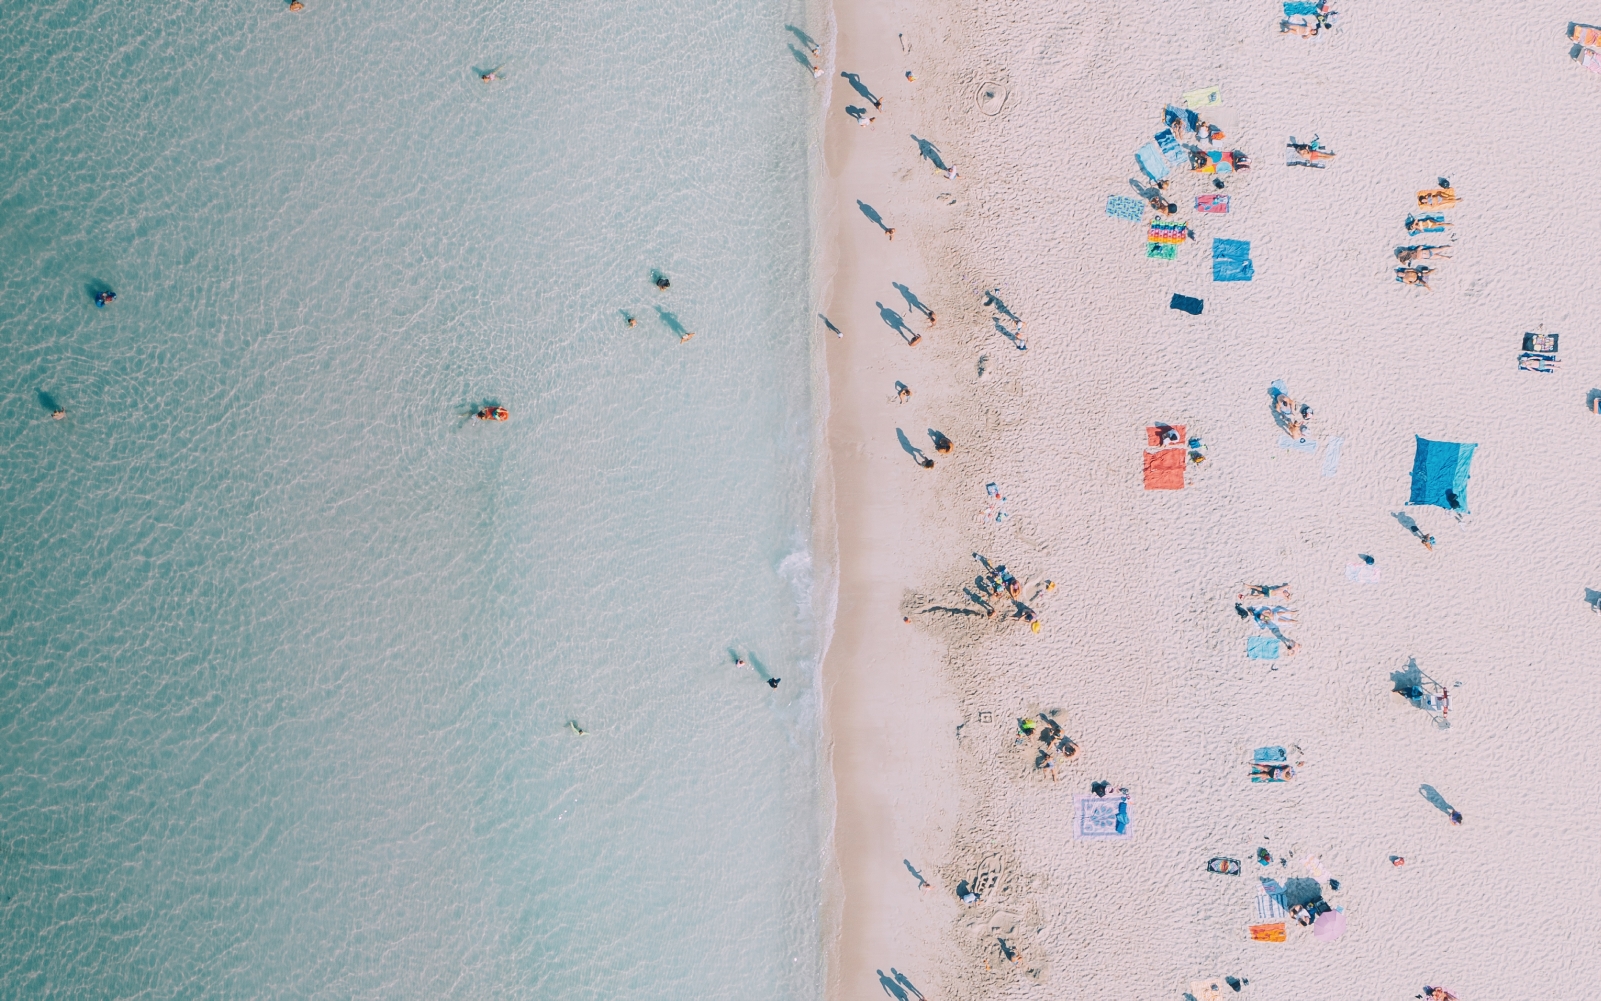 Bird's eye view of a beach where sand and water meet with people on both sides